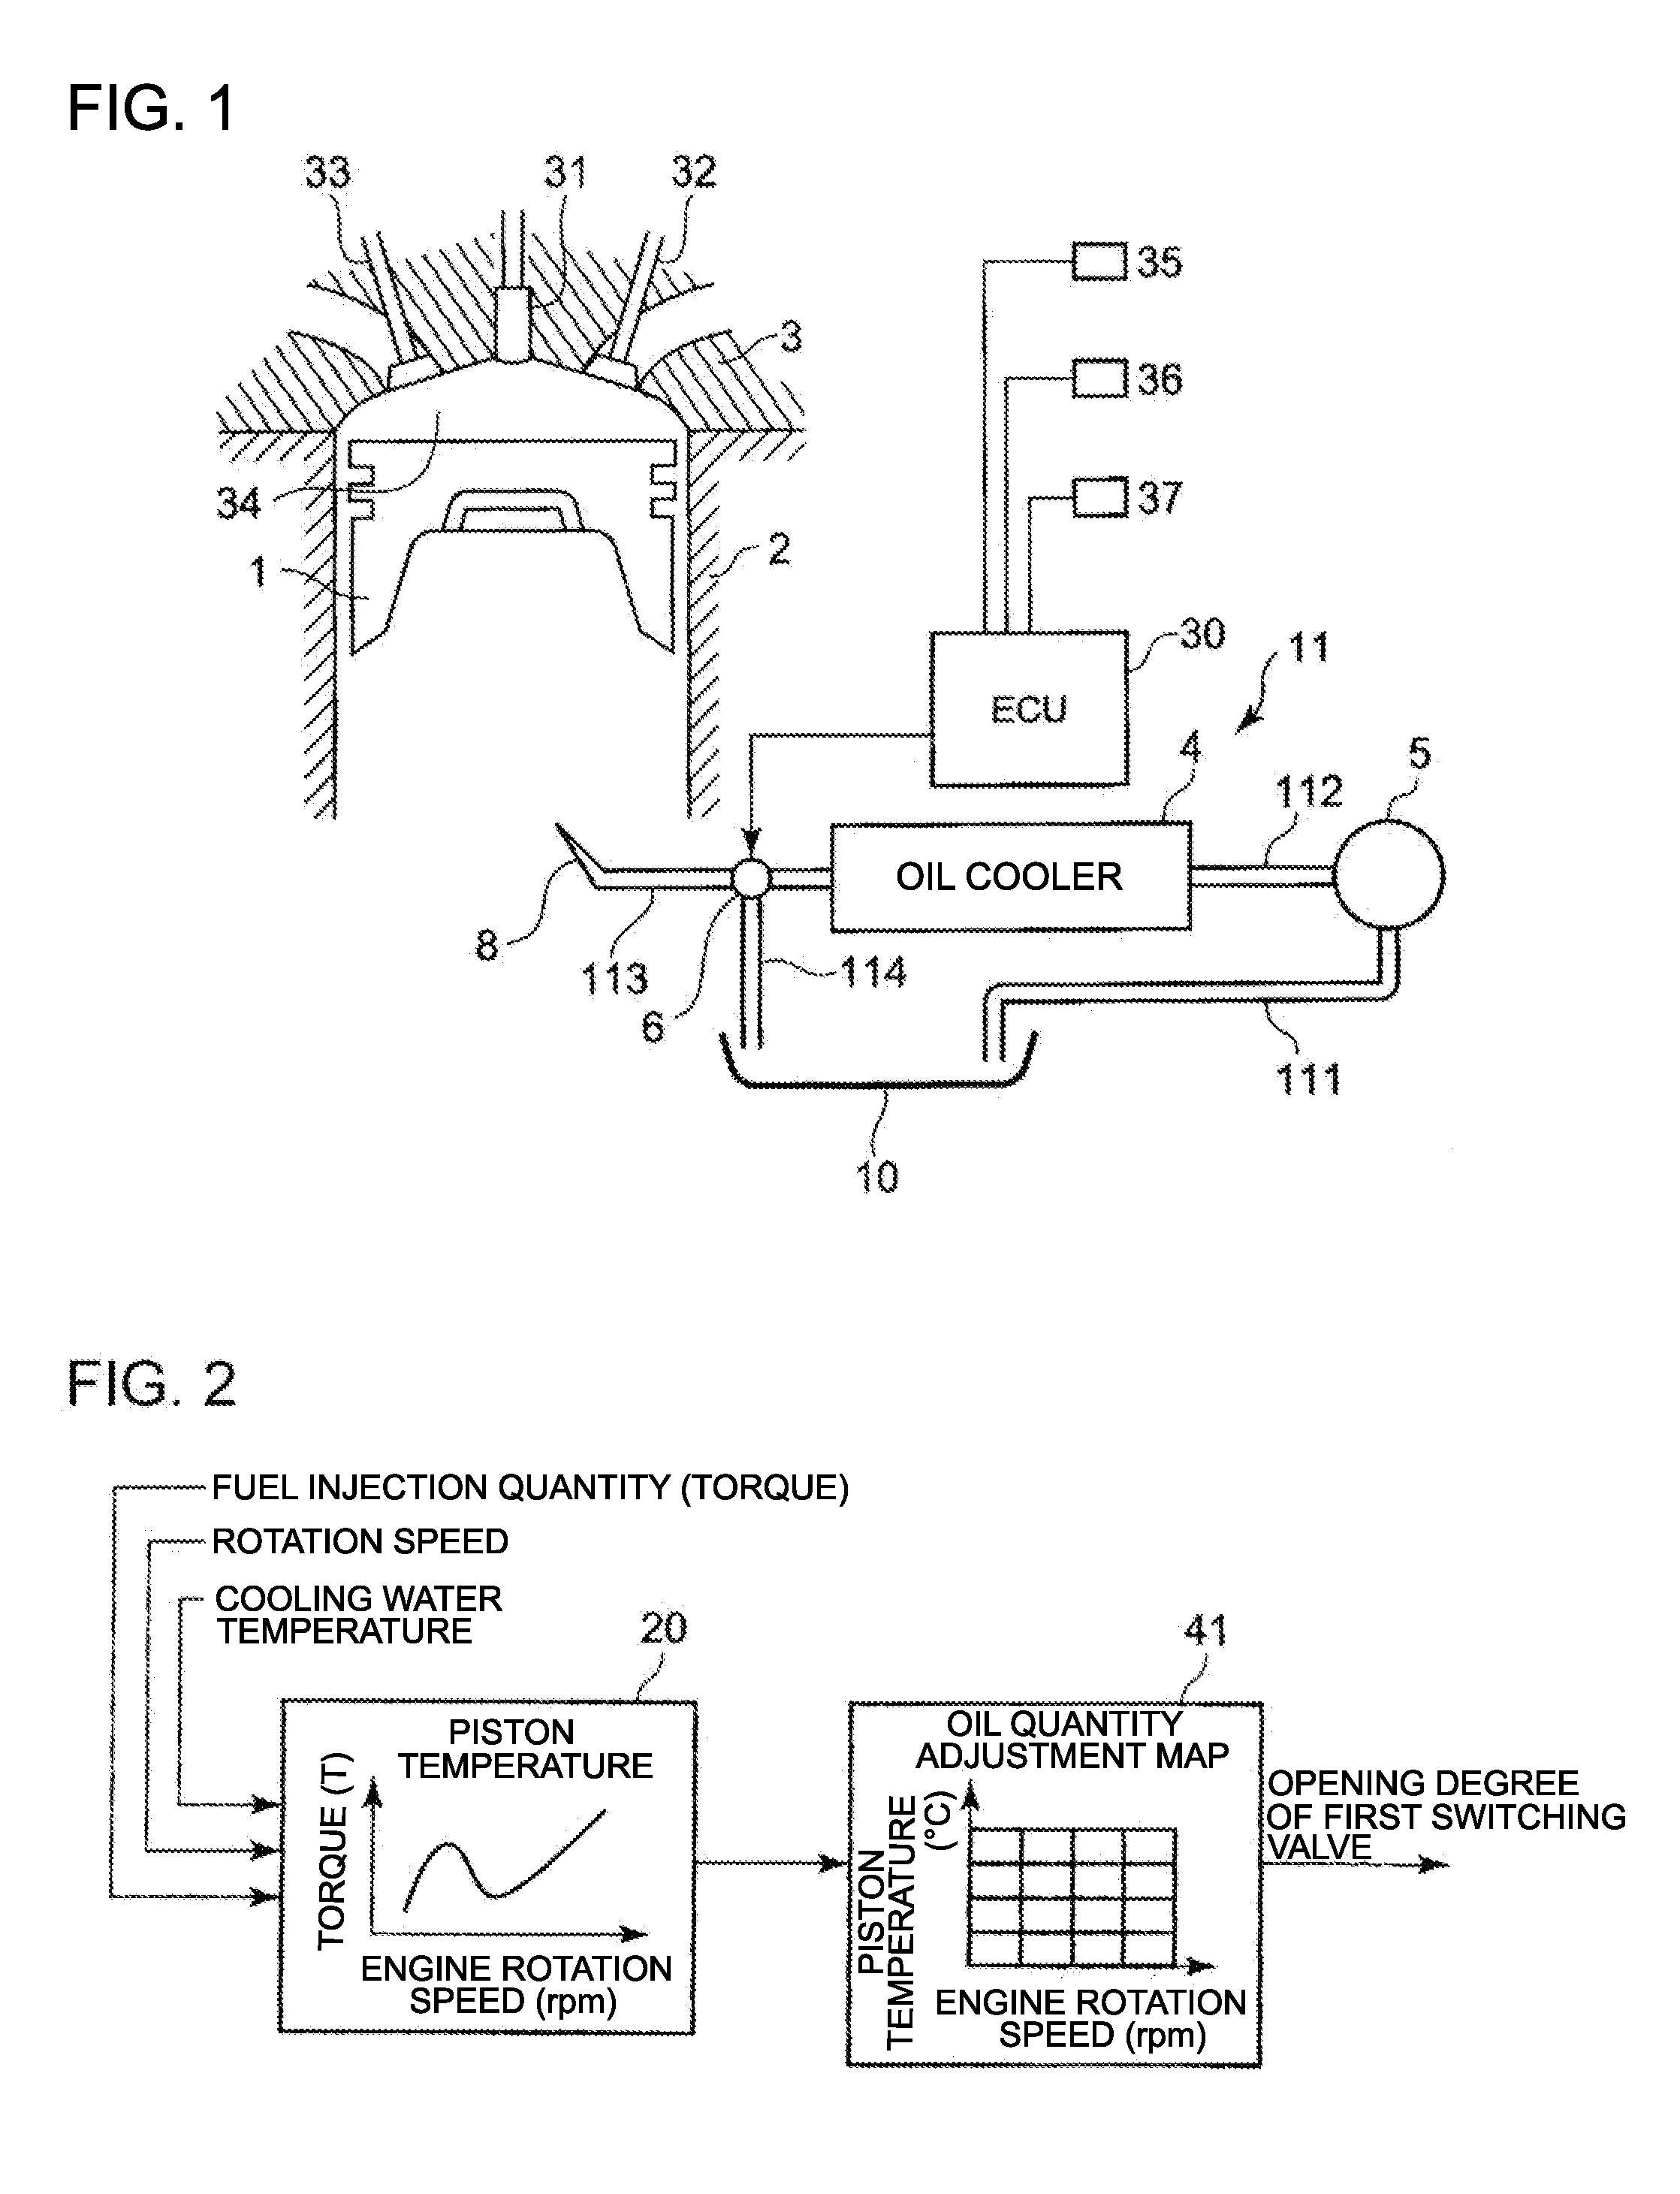 Cooling device for engine